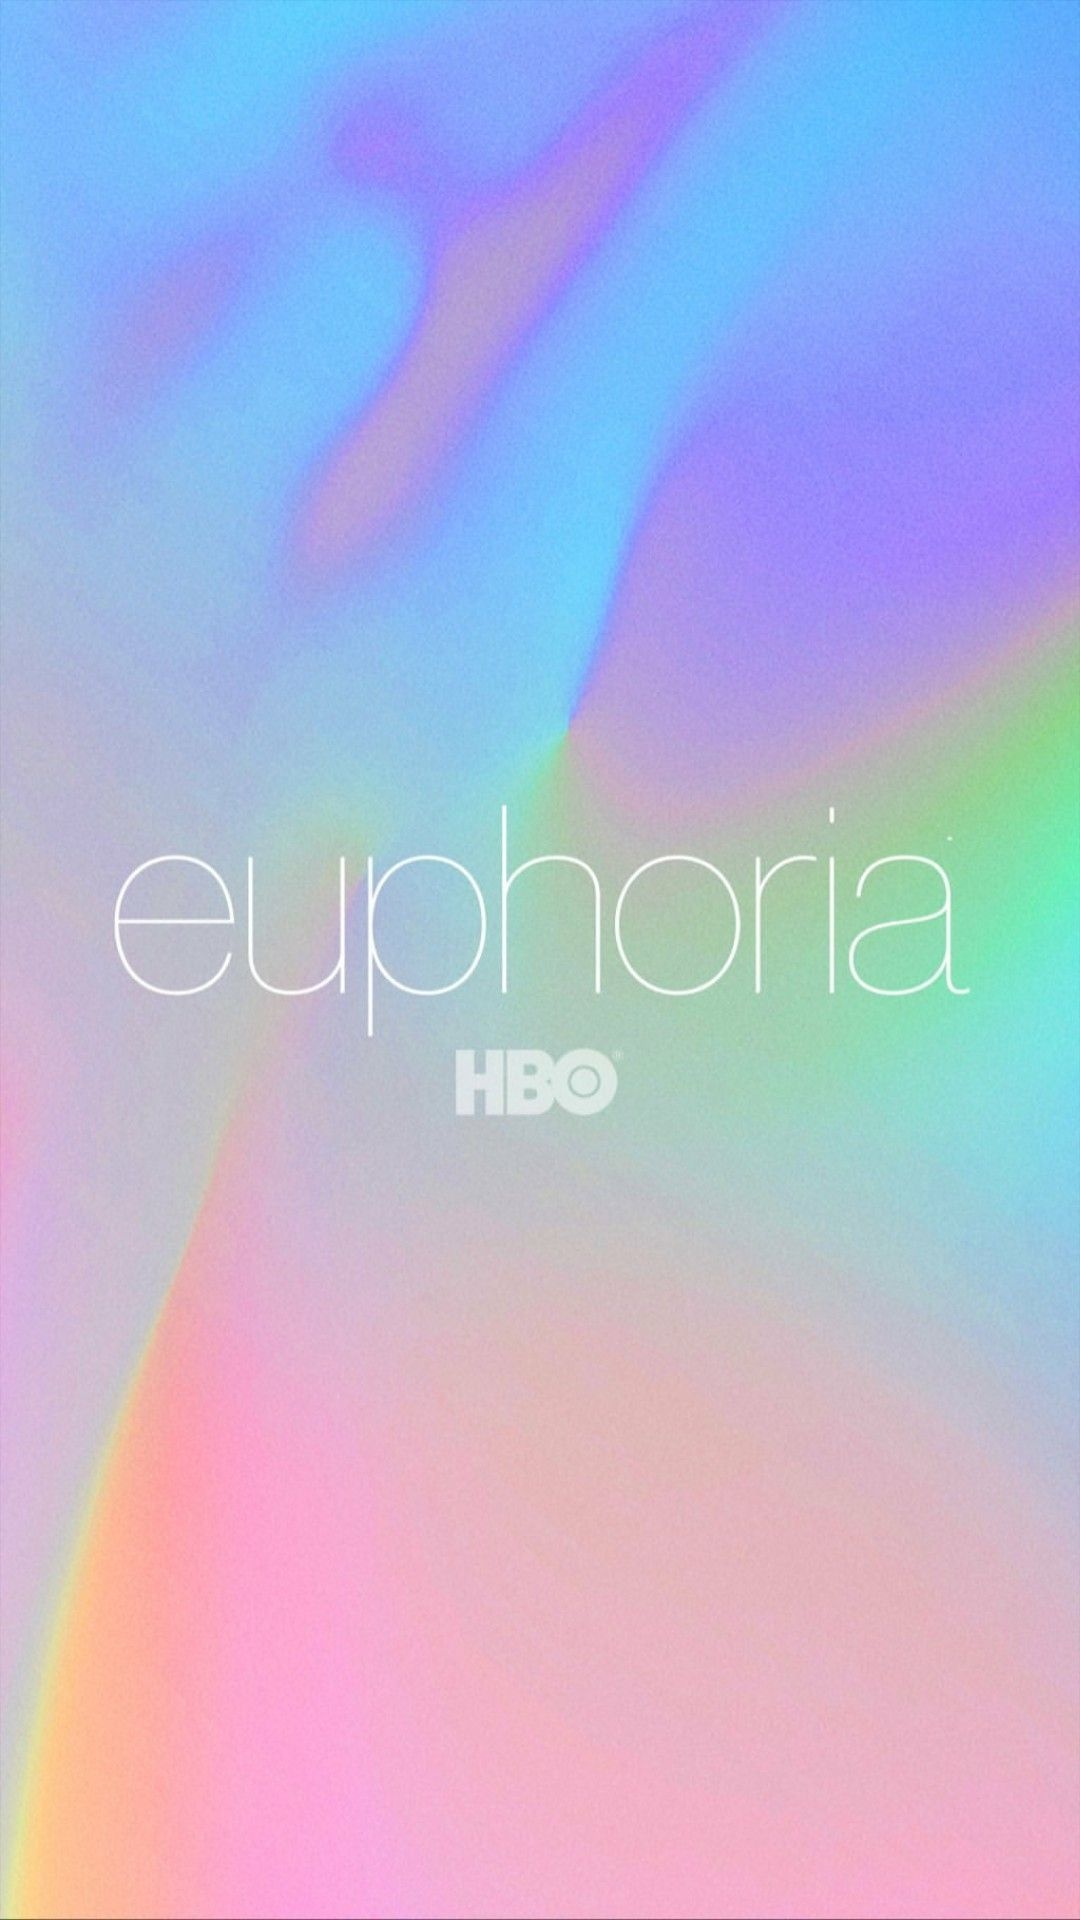 HBO: An American teen drama series, Principally written by Sam Levinson for Home Box Office. 1080x1920 Full HD Background.